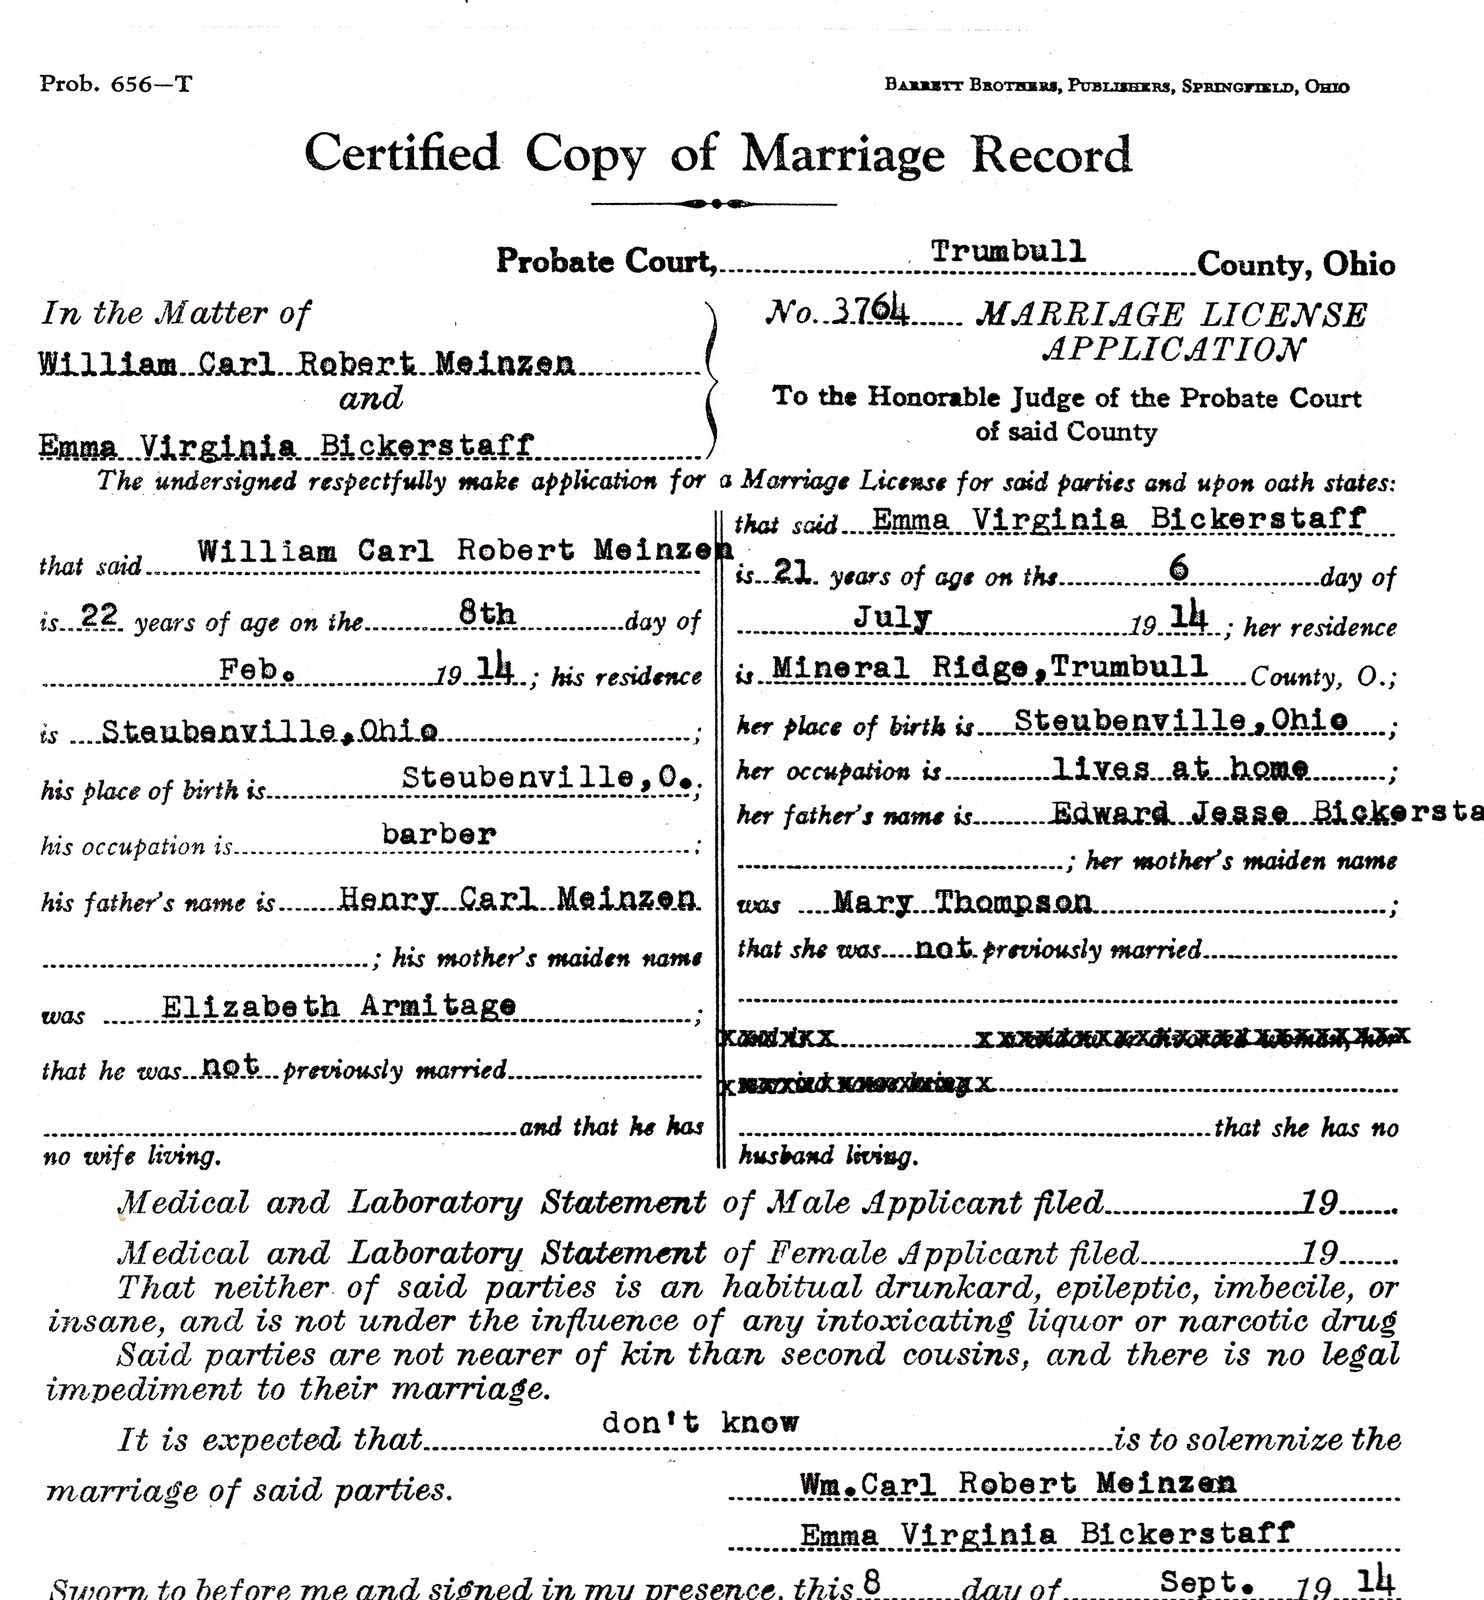 How to look up marriage records